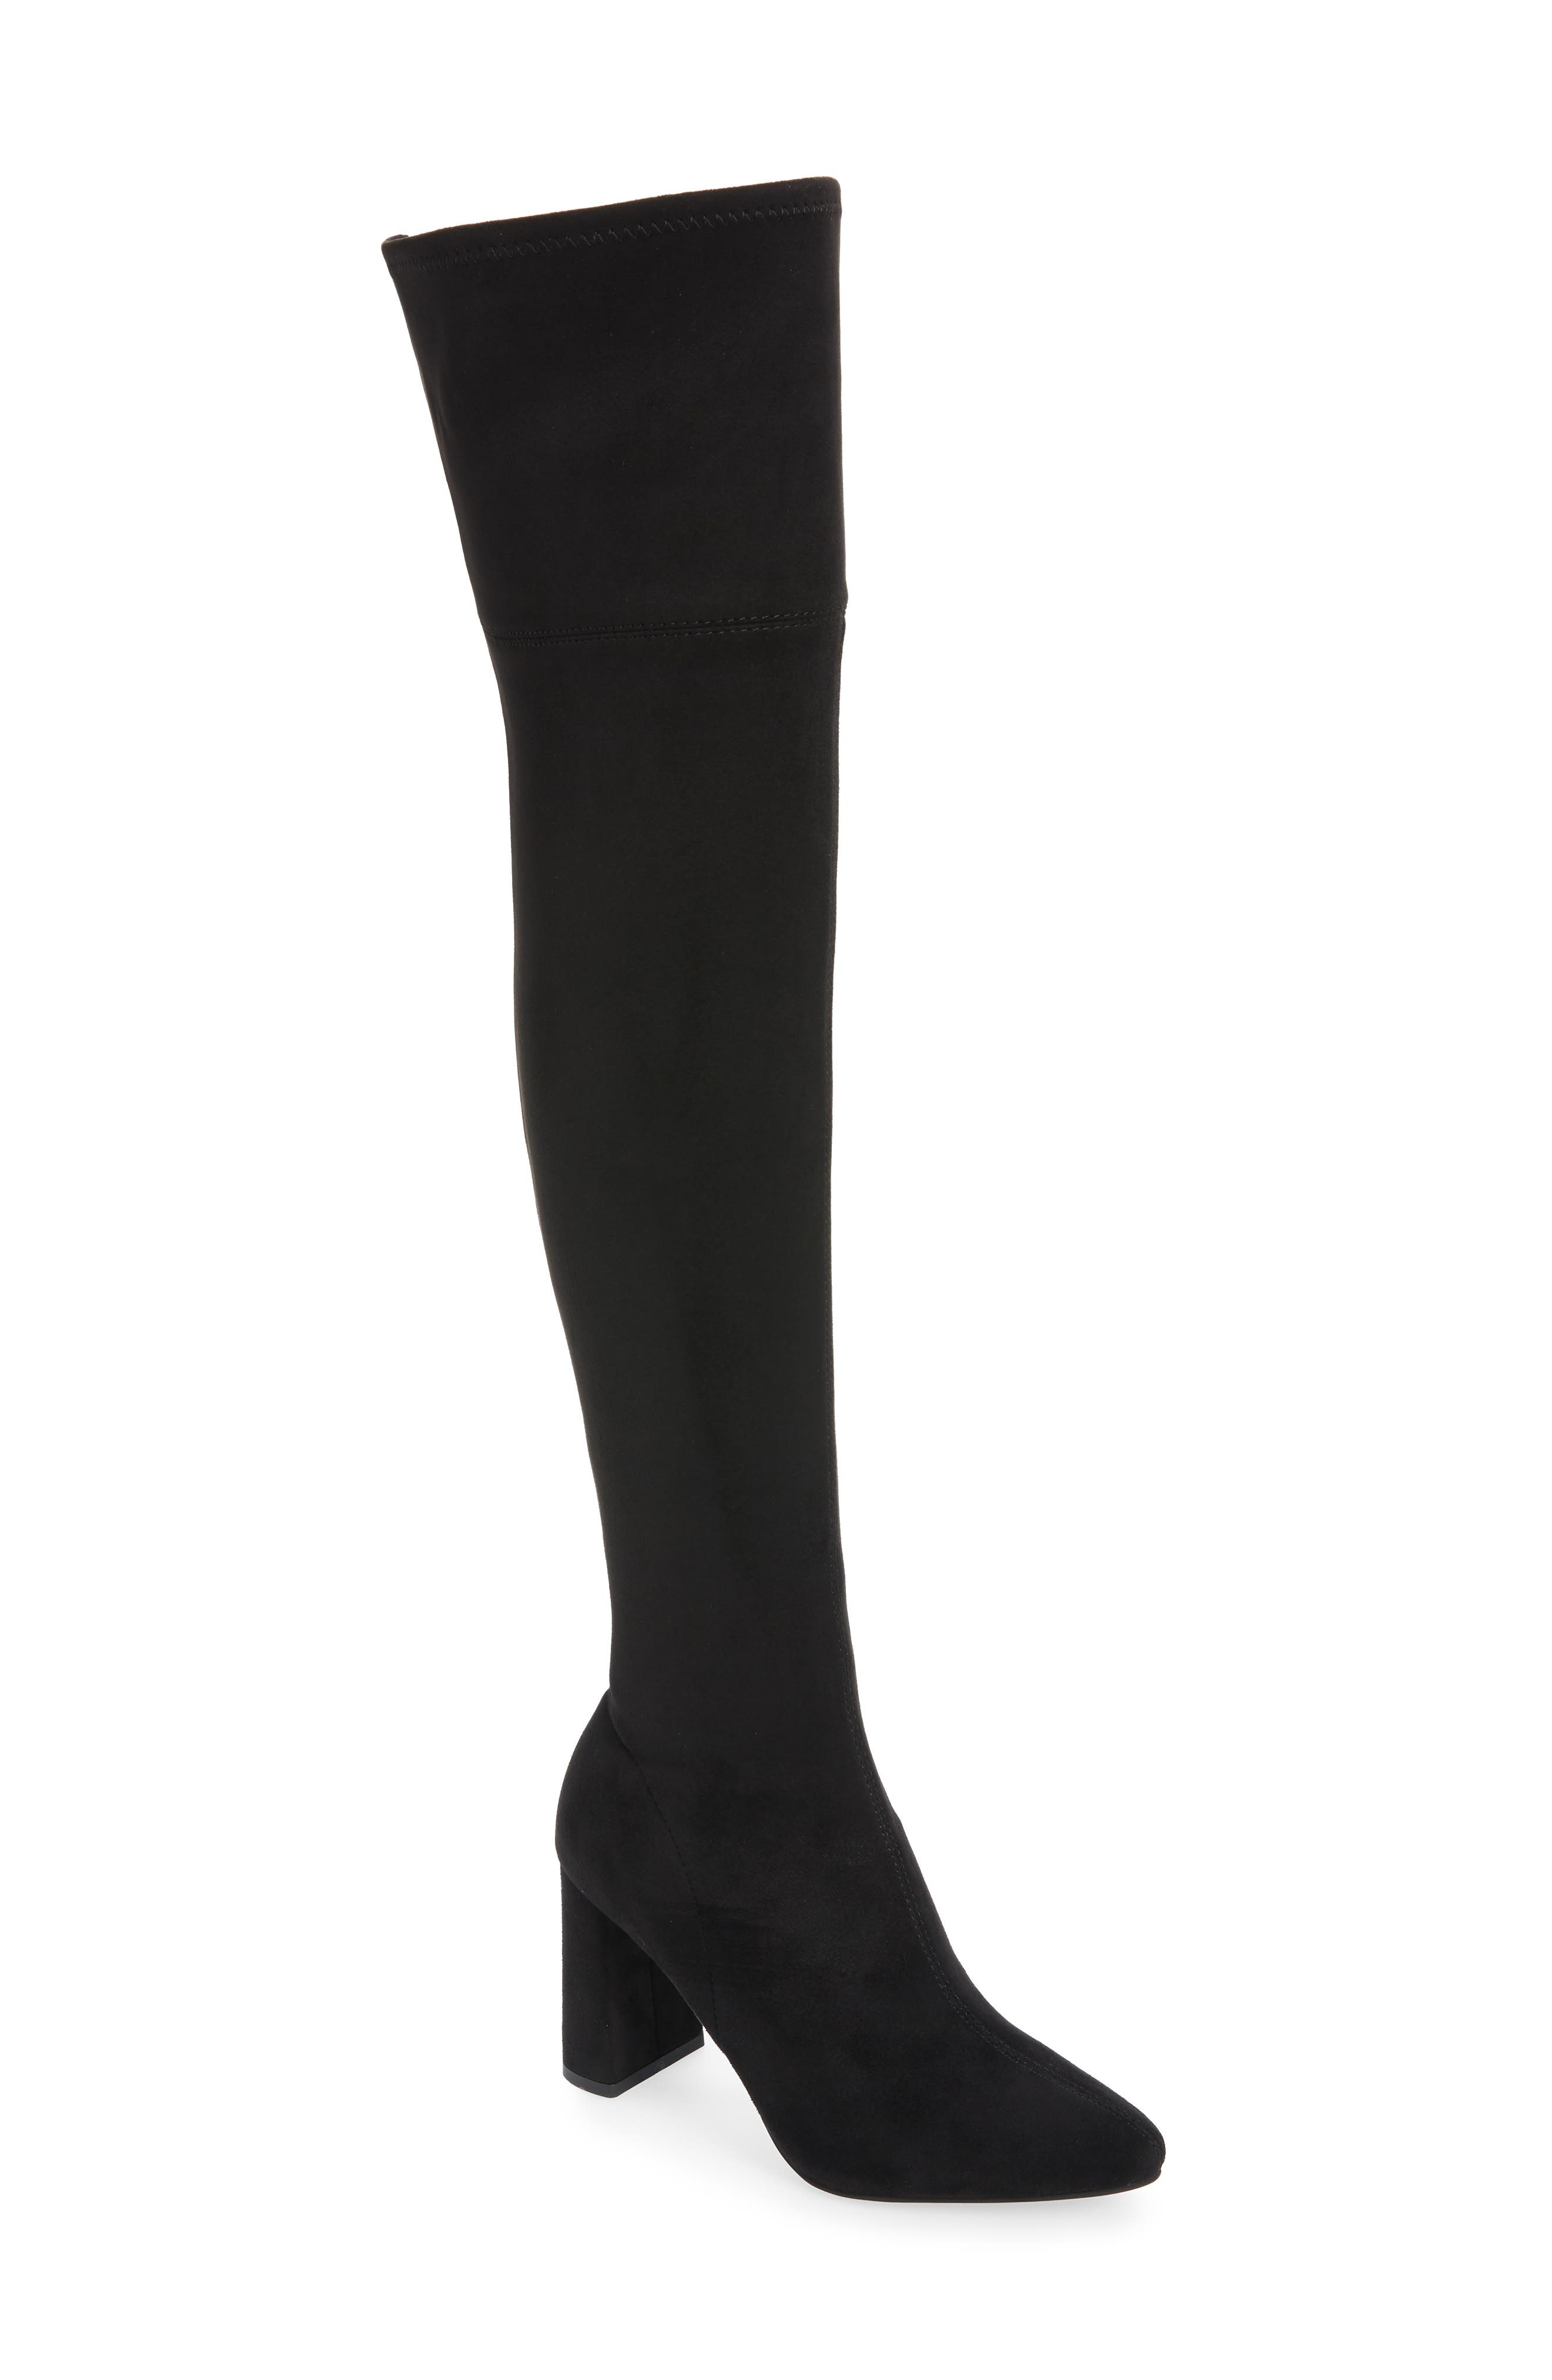 size 13 suede thigh high boots